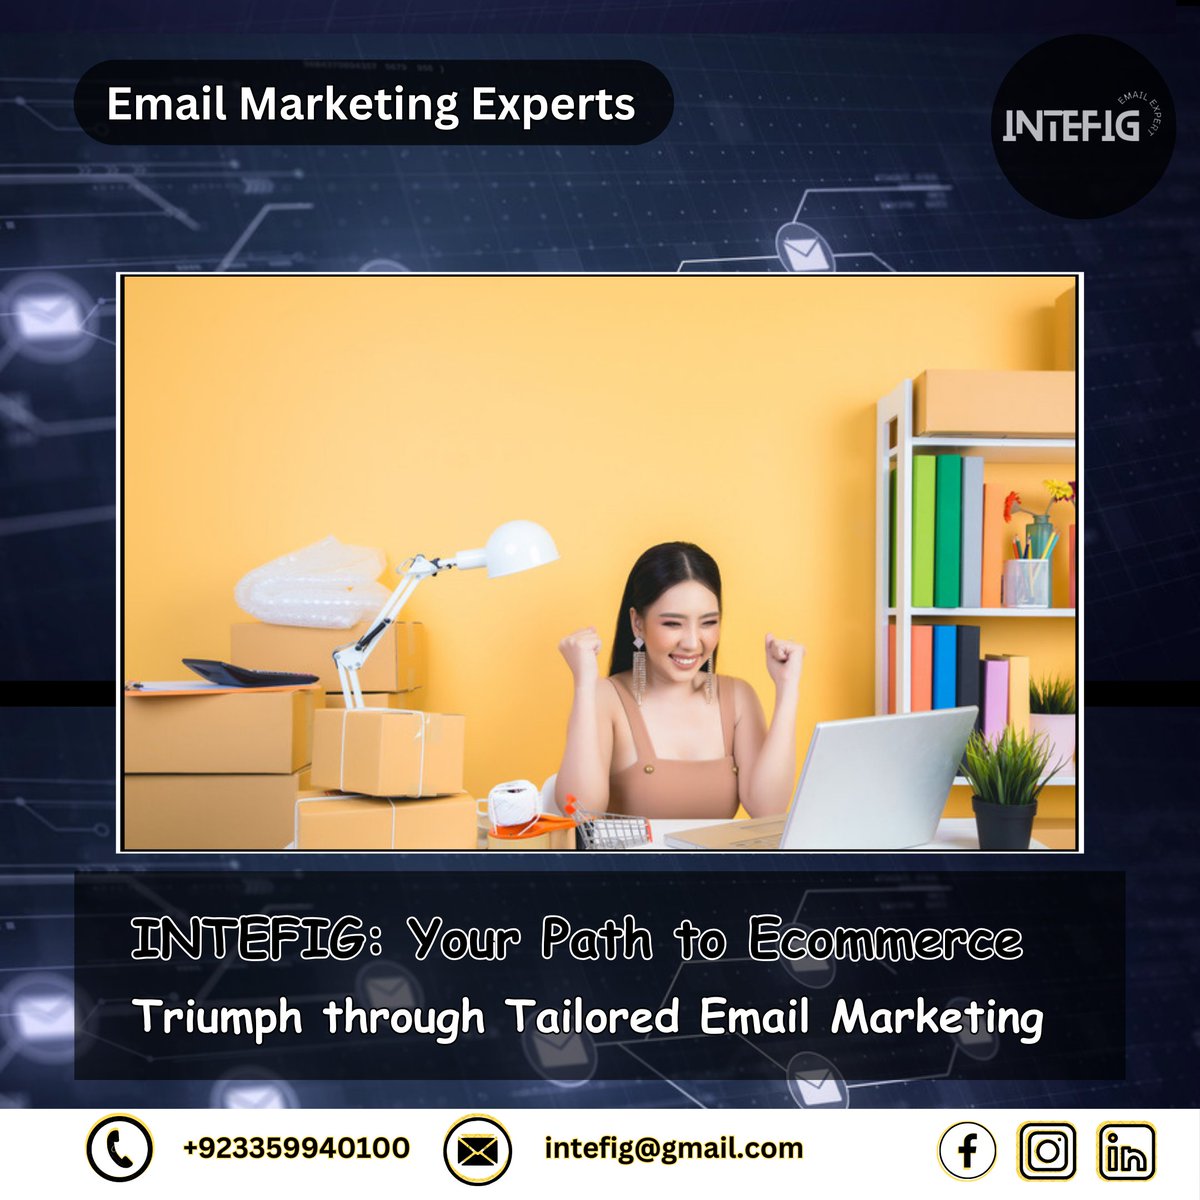 Contact @Intefig_ for a free #eCommerce audit & expert #EmailMarketing consultation. Let's enhance your #Business together
#Emailautomation #email #mailchimp #klaviyo #omnisend #openAI #mailerlite #Emailtemplates #letsconnect #ROI #ecommercebusiness #offers #sales #ecommercestore